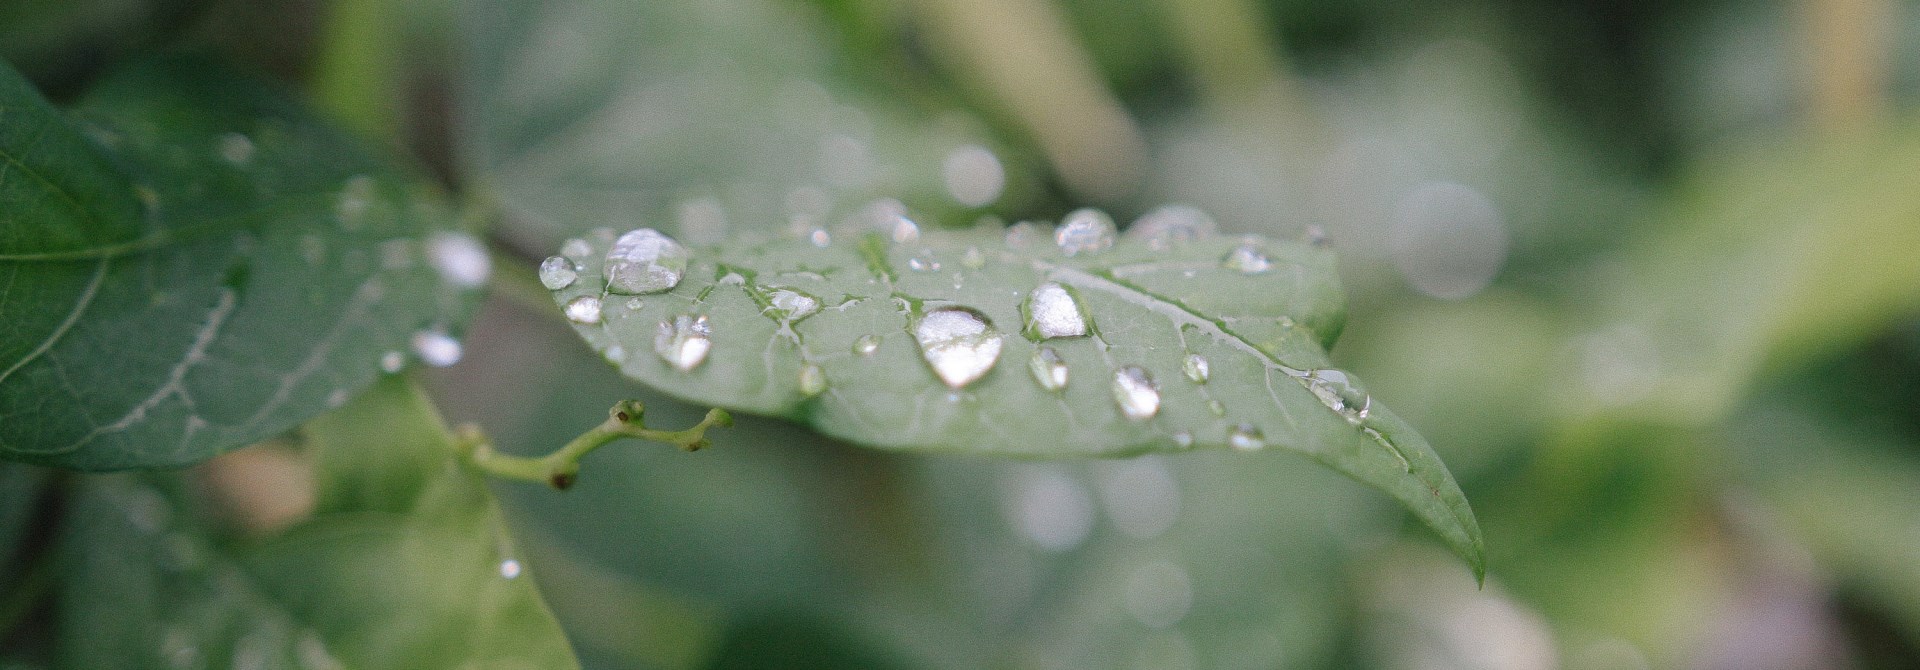 A close-up of a leaf with rain droplets on it, with the rest of the bush blurred in the background.